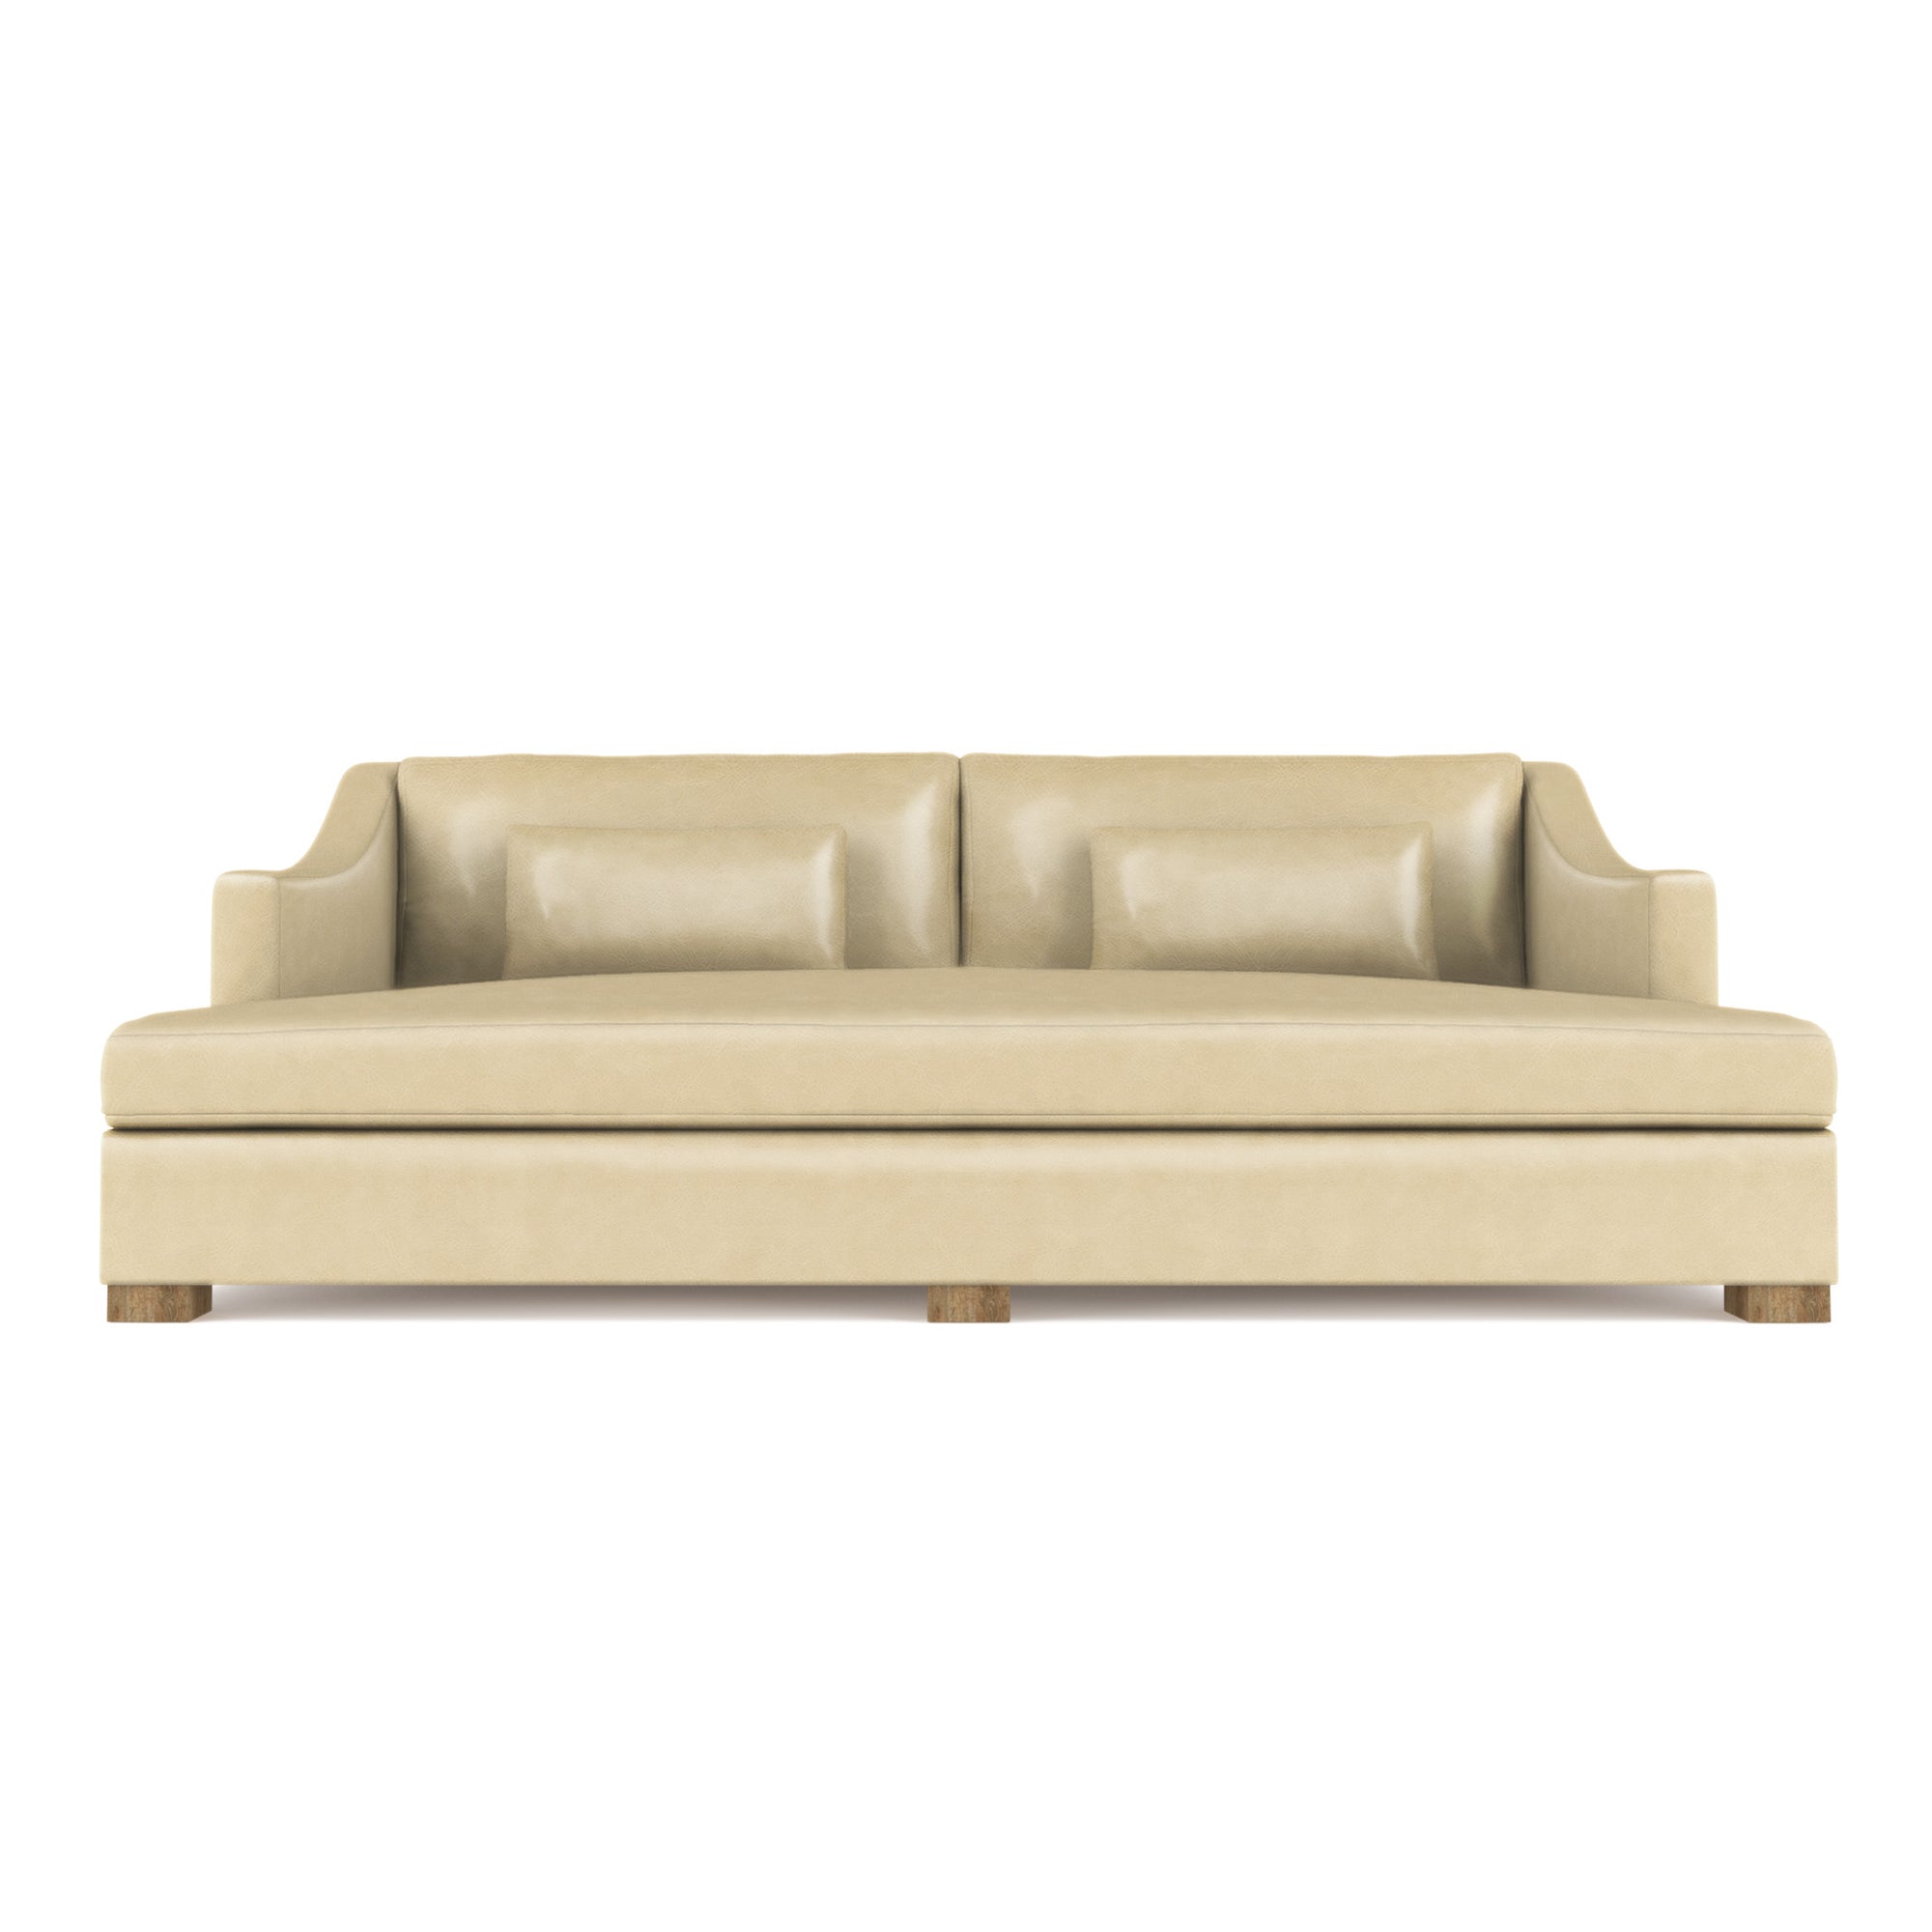 Crosby Daybed - Oyster Vintage Leather